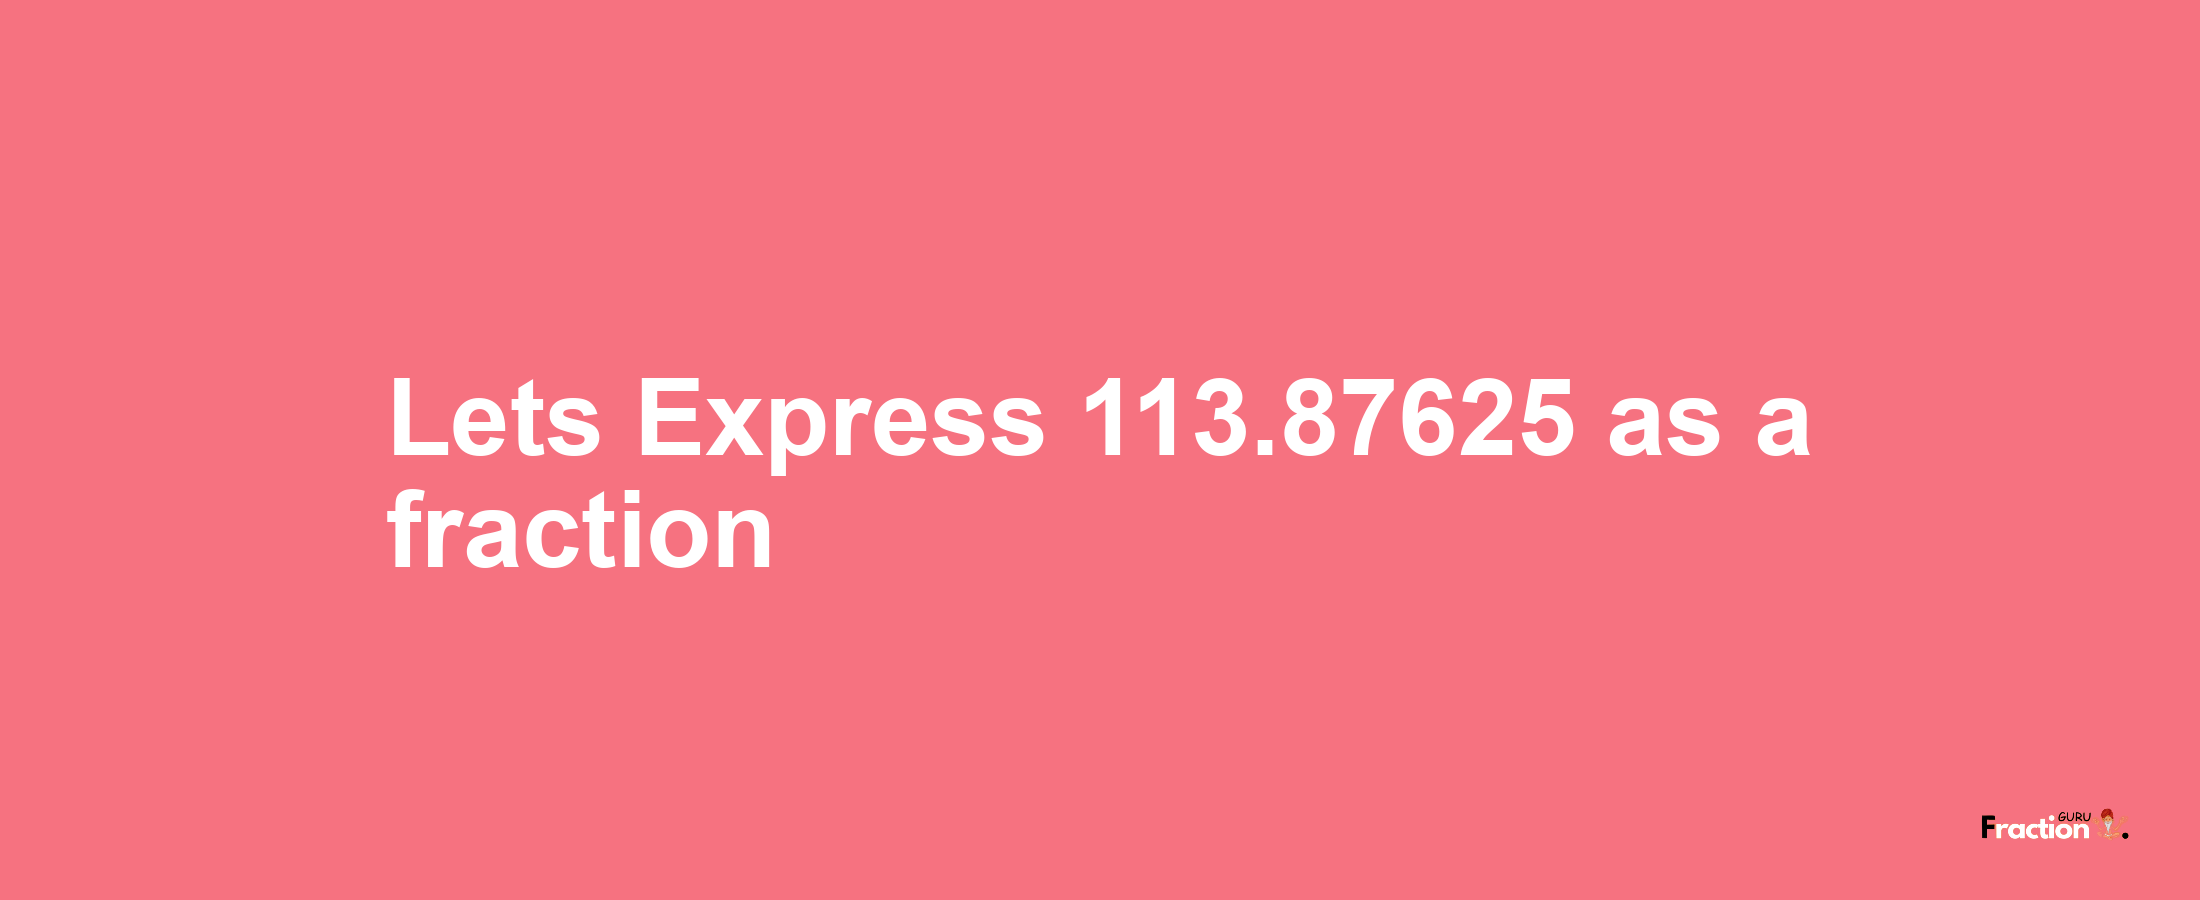 Lets Express 113.87625 as afraction